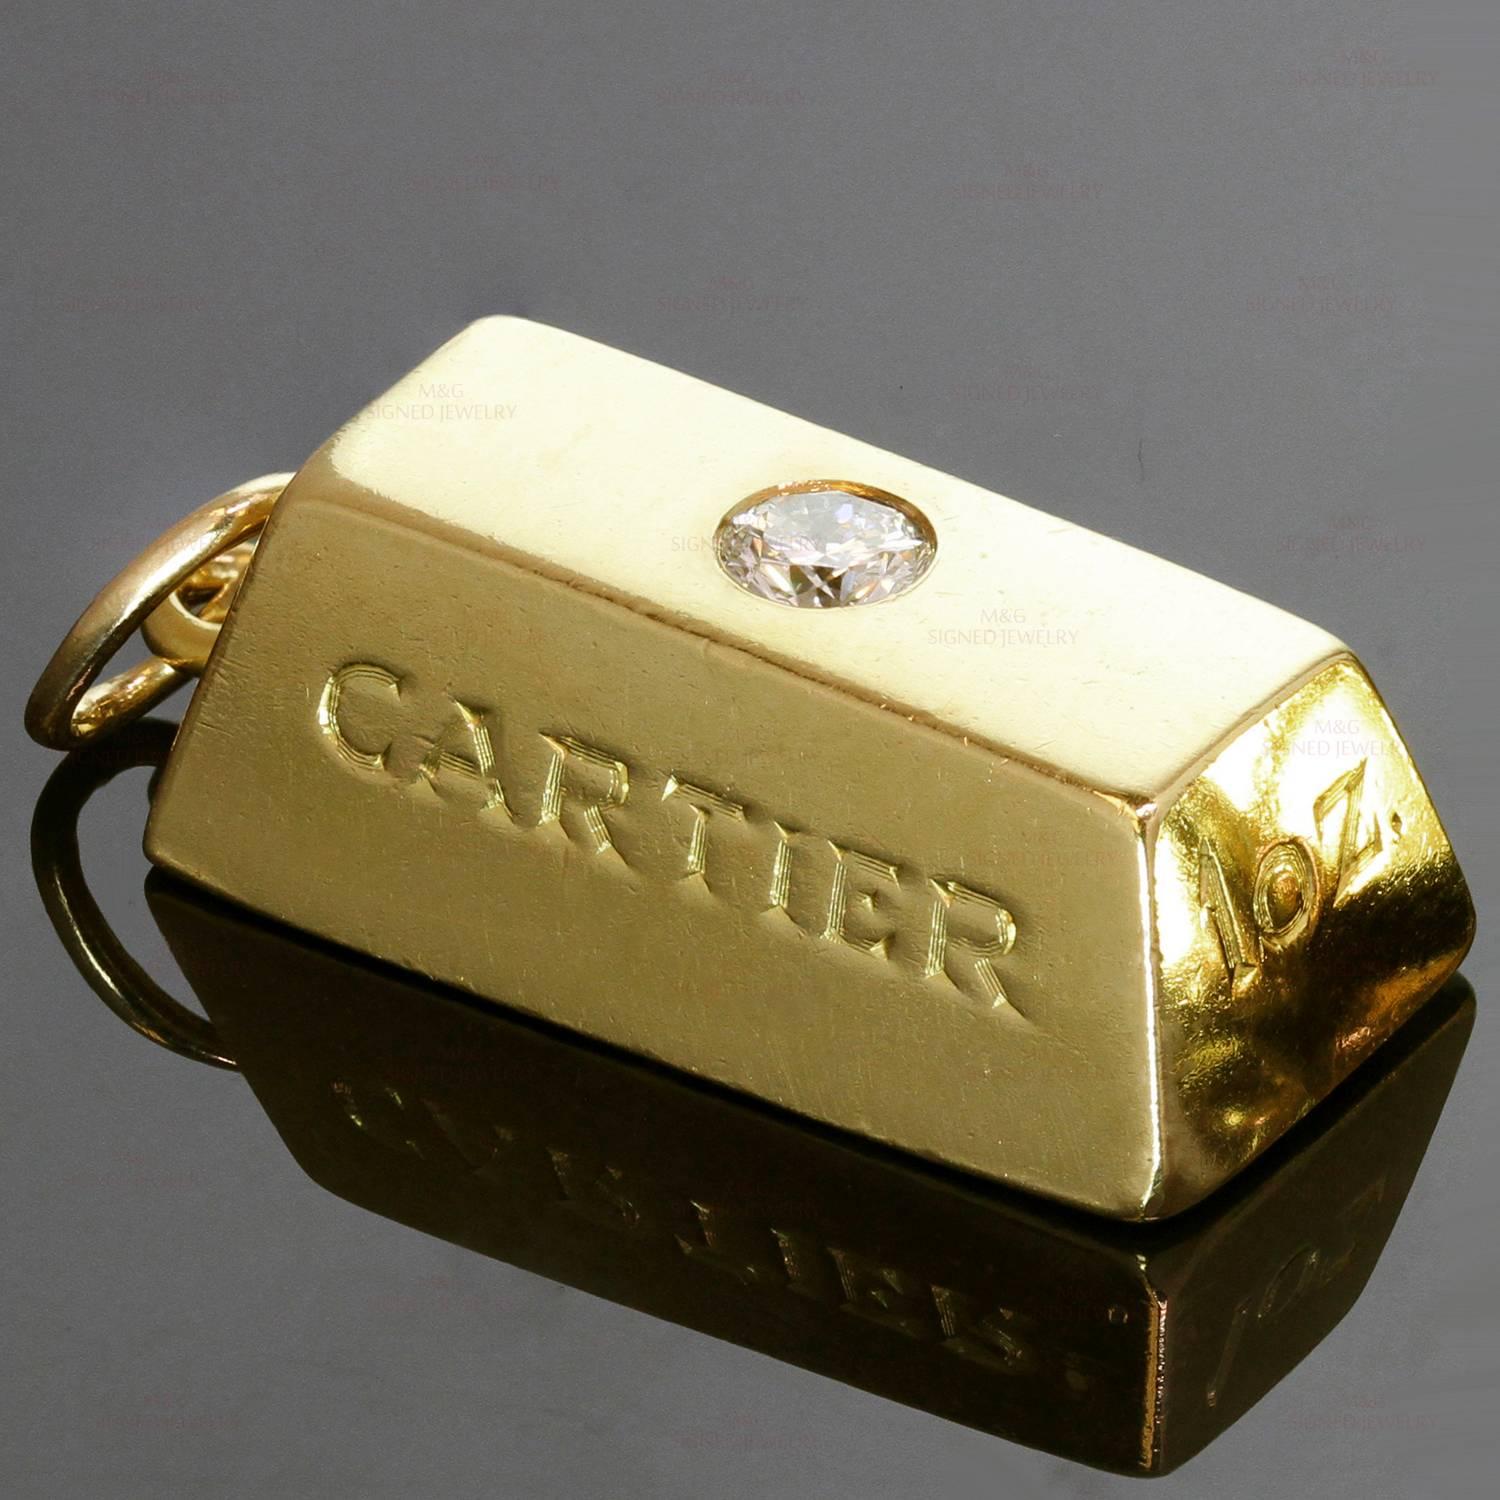 This rare classic Cartier 1 ounce ingot bar is crafted in solid 18k yellow gold and set with a brilliant-cut round diamond of an estimated 0.20 carats. Made in France circa 1980s. Measurements: 0.51" (13mm) width, 0.98" (25mm) length. 